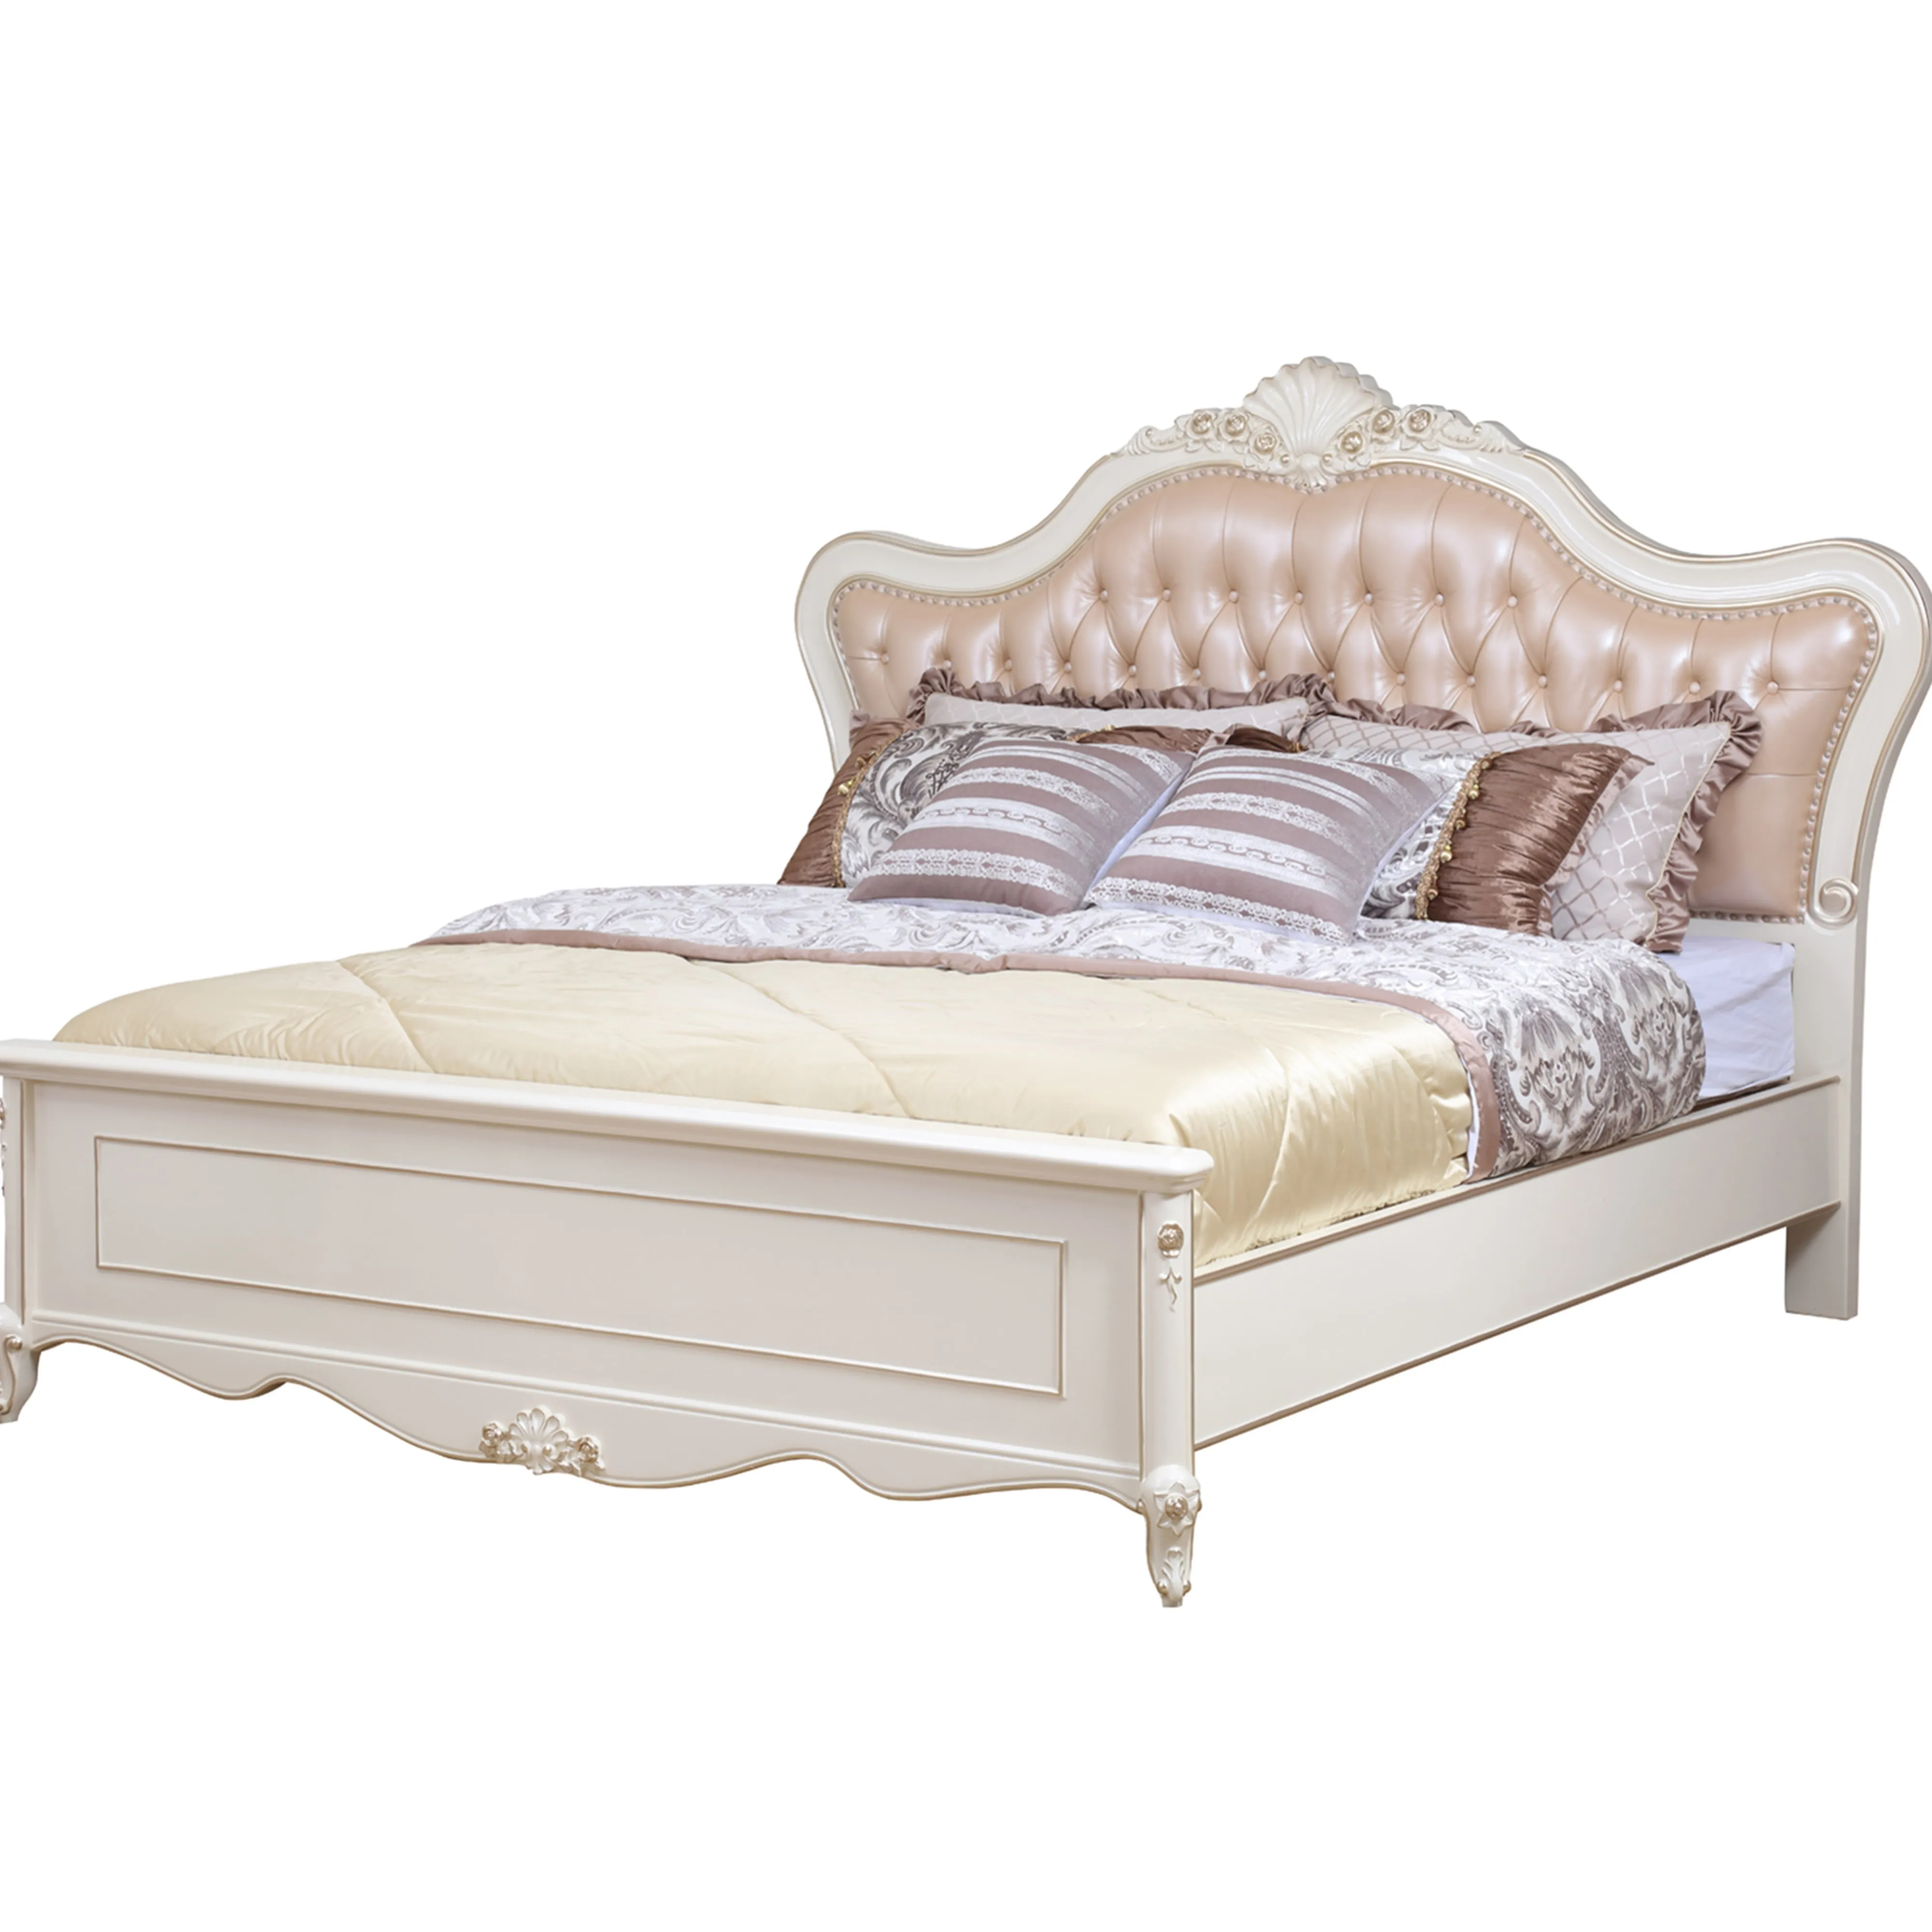 Hot sale bed room furniture solid wood king size bed